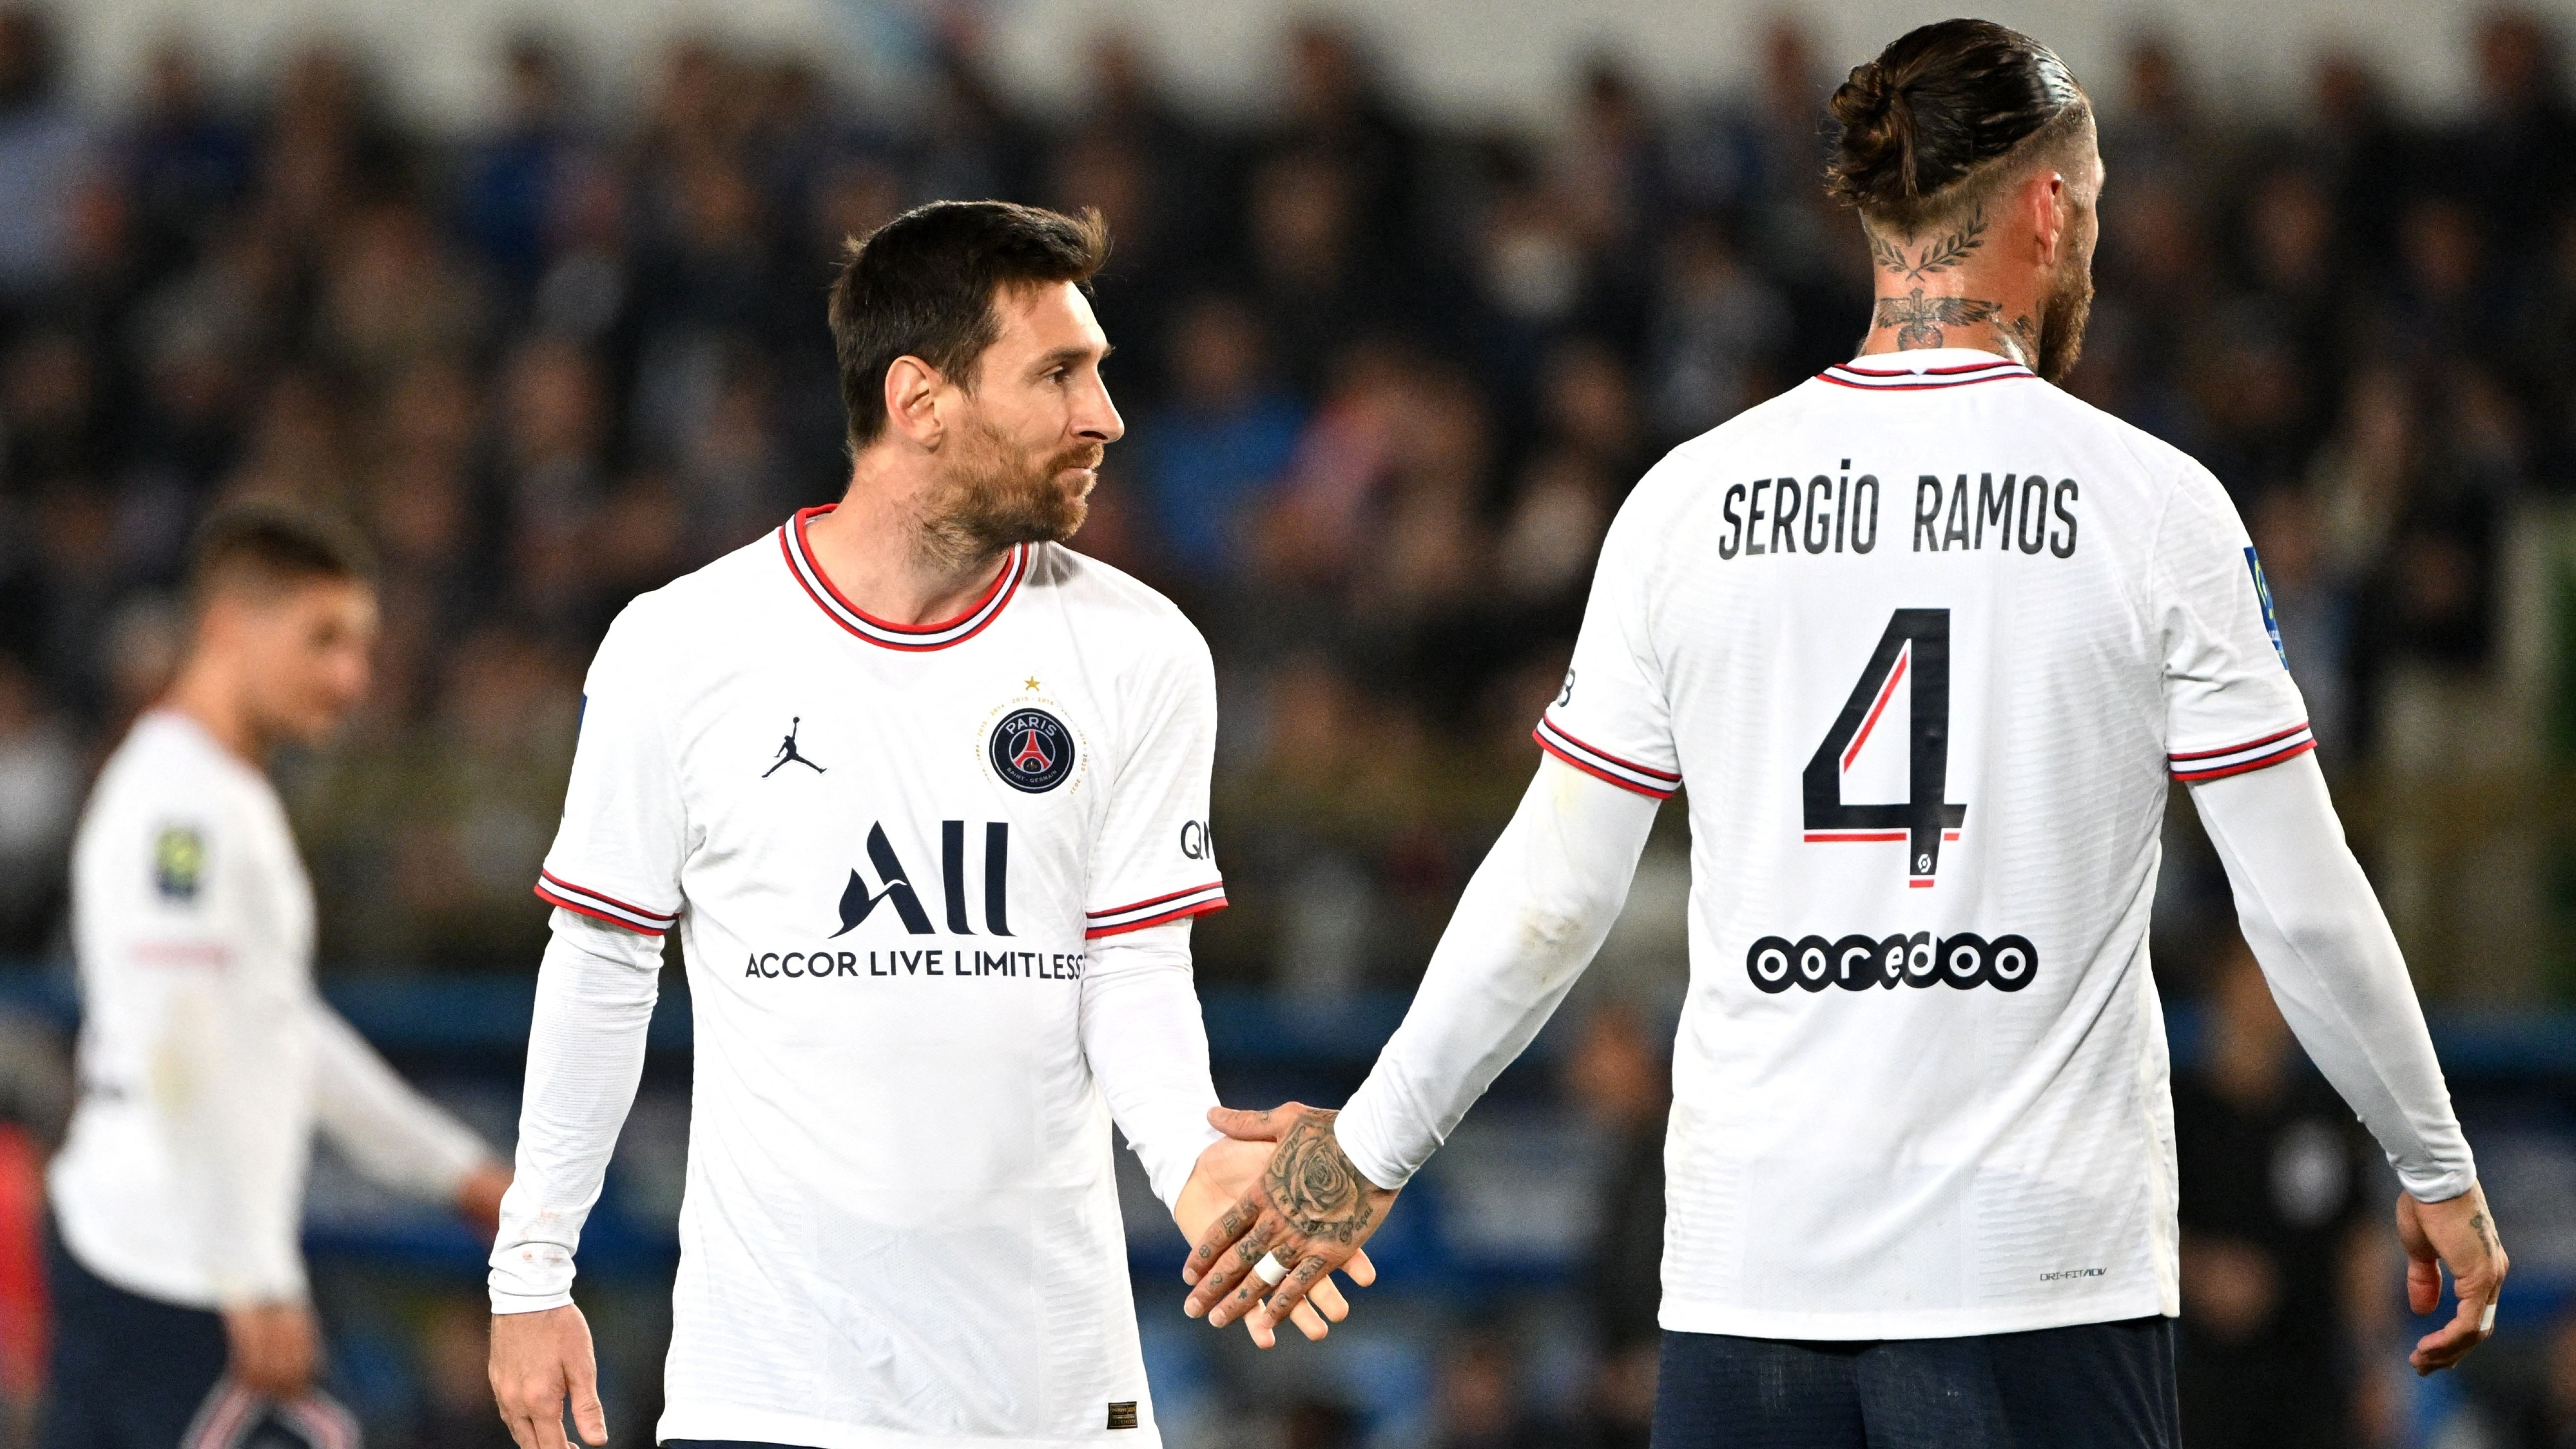 It's a privilege to play with Messi' - Ramos insists he has 'excellent'  relationship with PSG superstar | Goal.com India